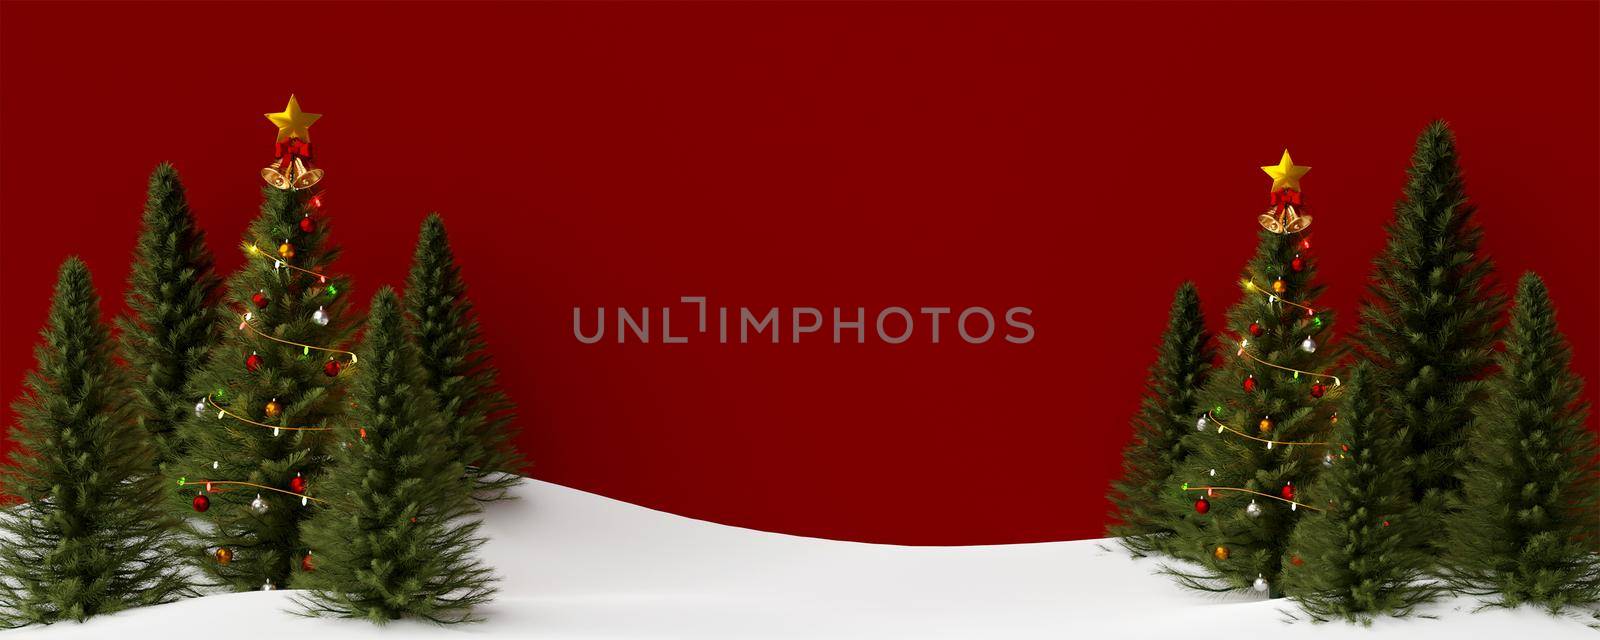 Christmas background, Christmas tree on snow ground with red background, 3d illustration by nutzchotwarut